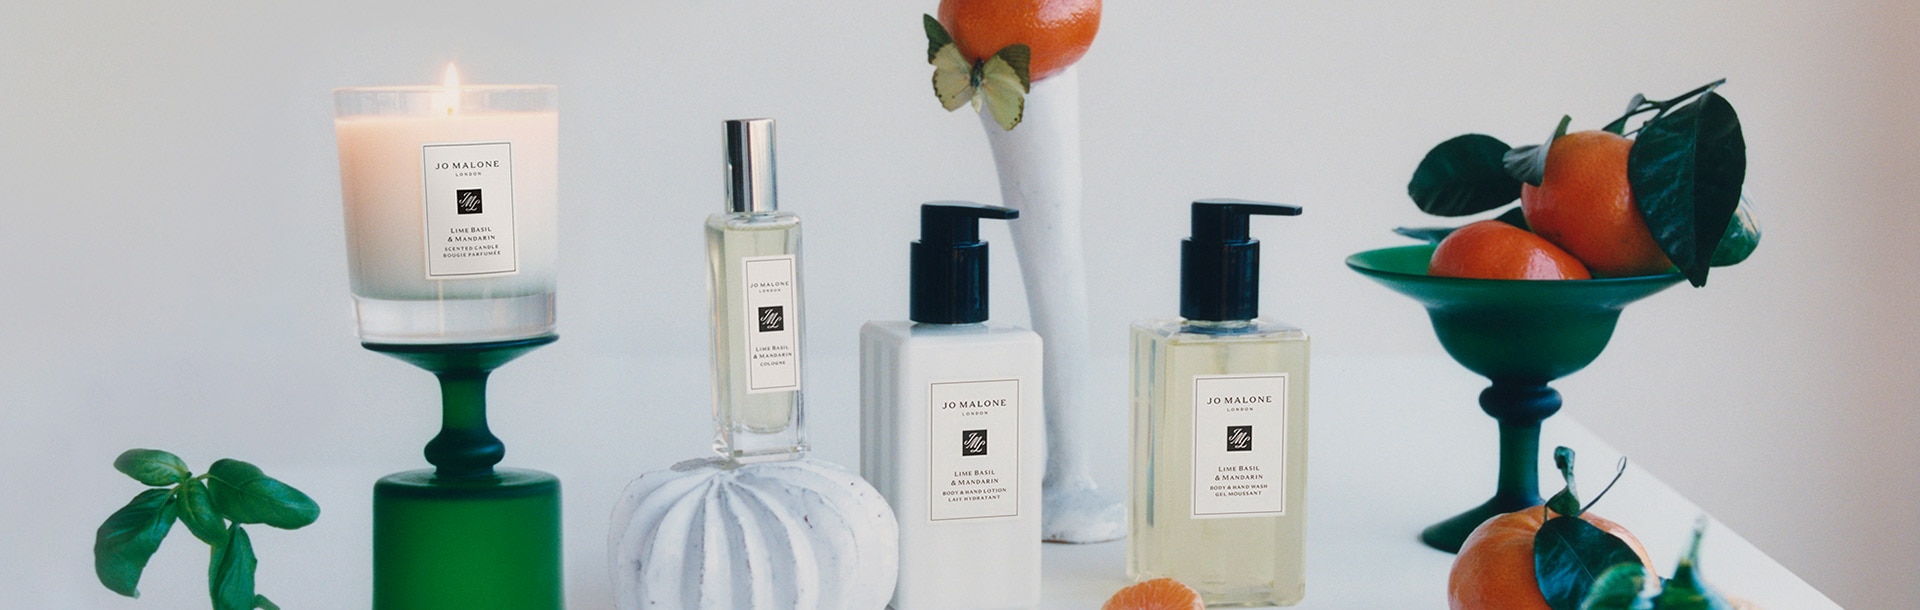 image of Jo Malone London body and hand wash, lotion and cologne in sizes under $50 with 8 globes in the background